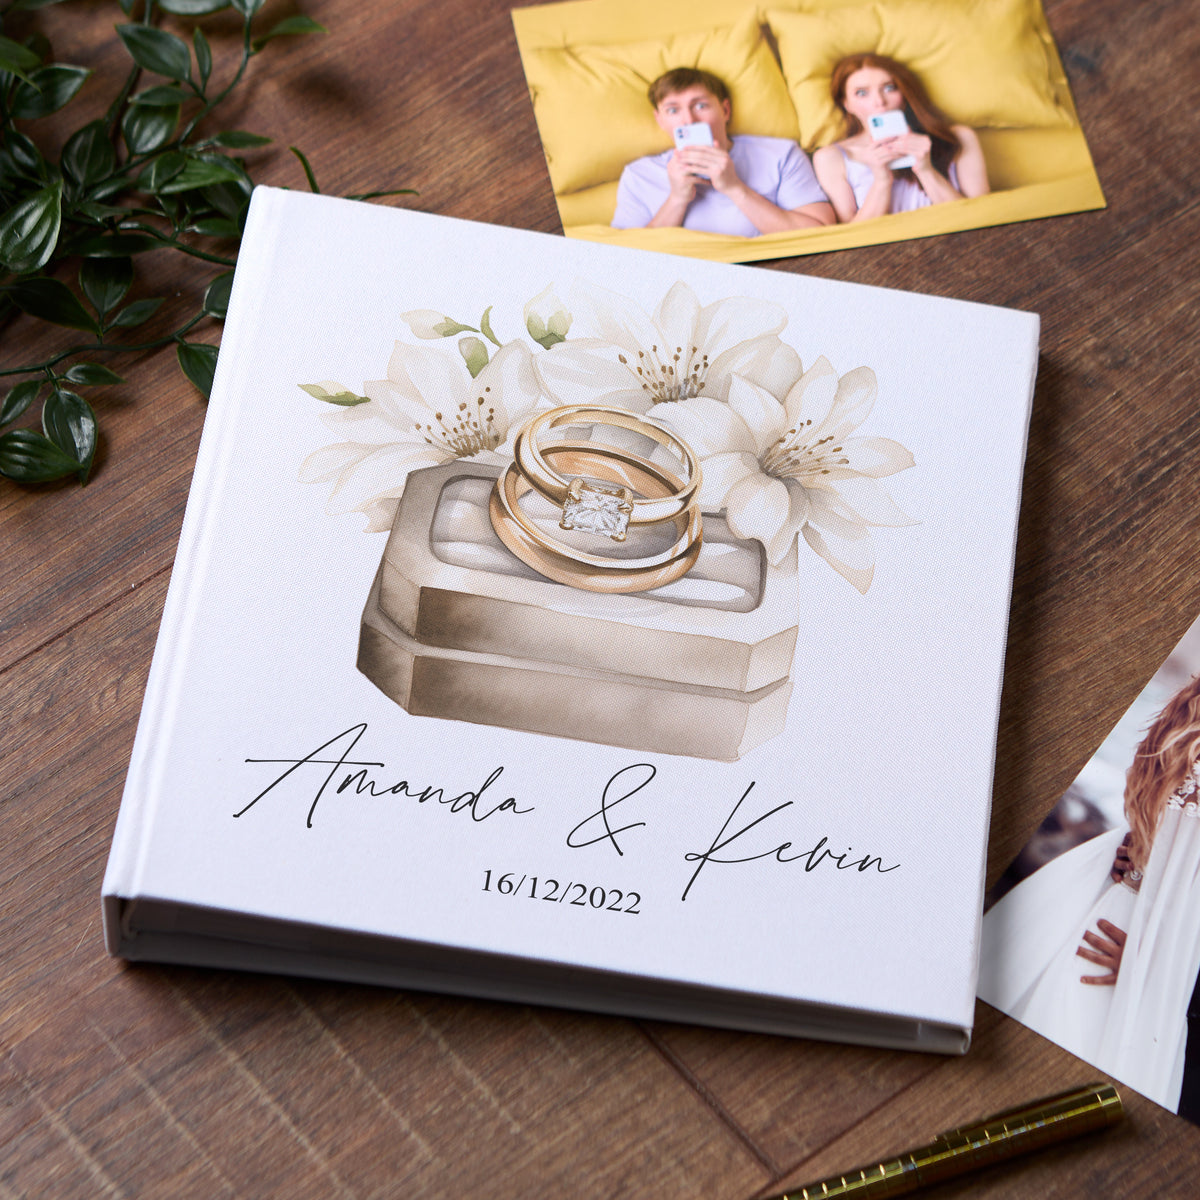 Large Book Bound Personalised Wedding Photo Album With Rings